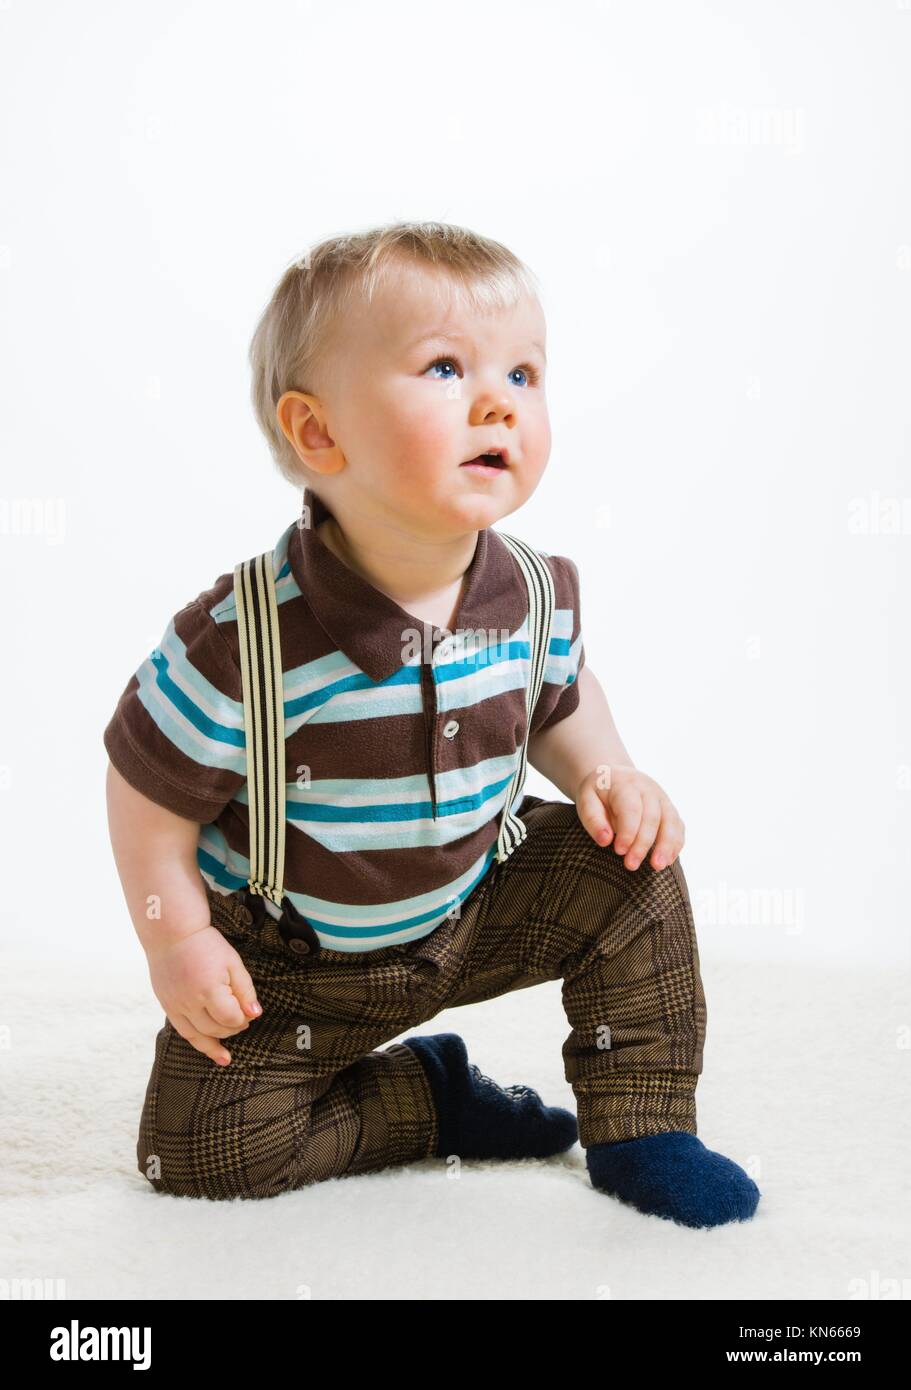 Baby boy, 16 Months old wearing striped shirt and suspenders, white background. Stock Photo